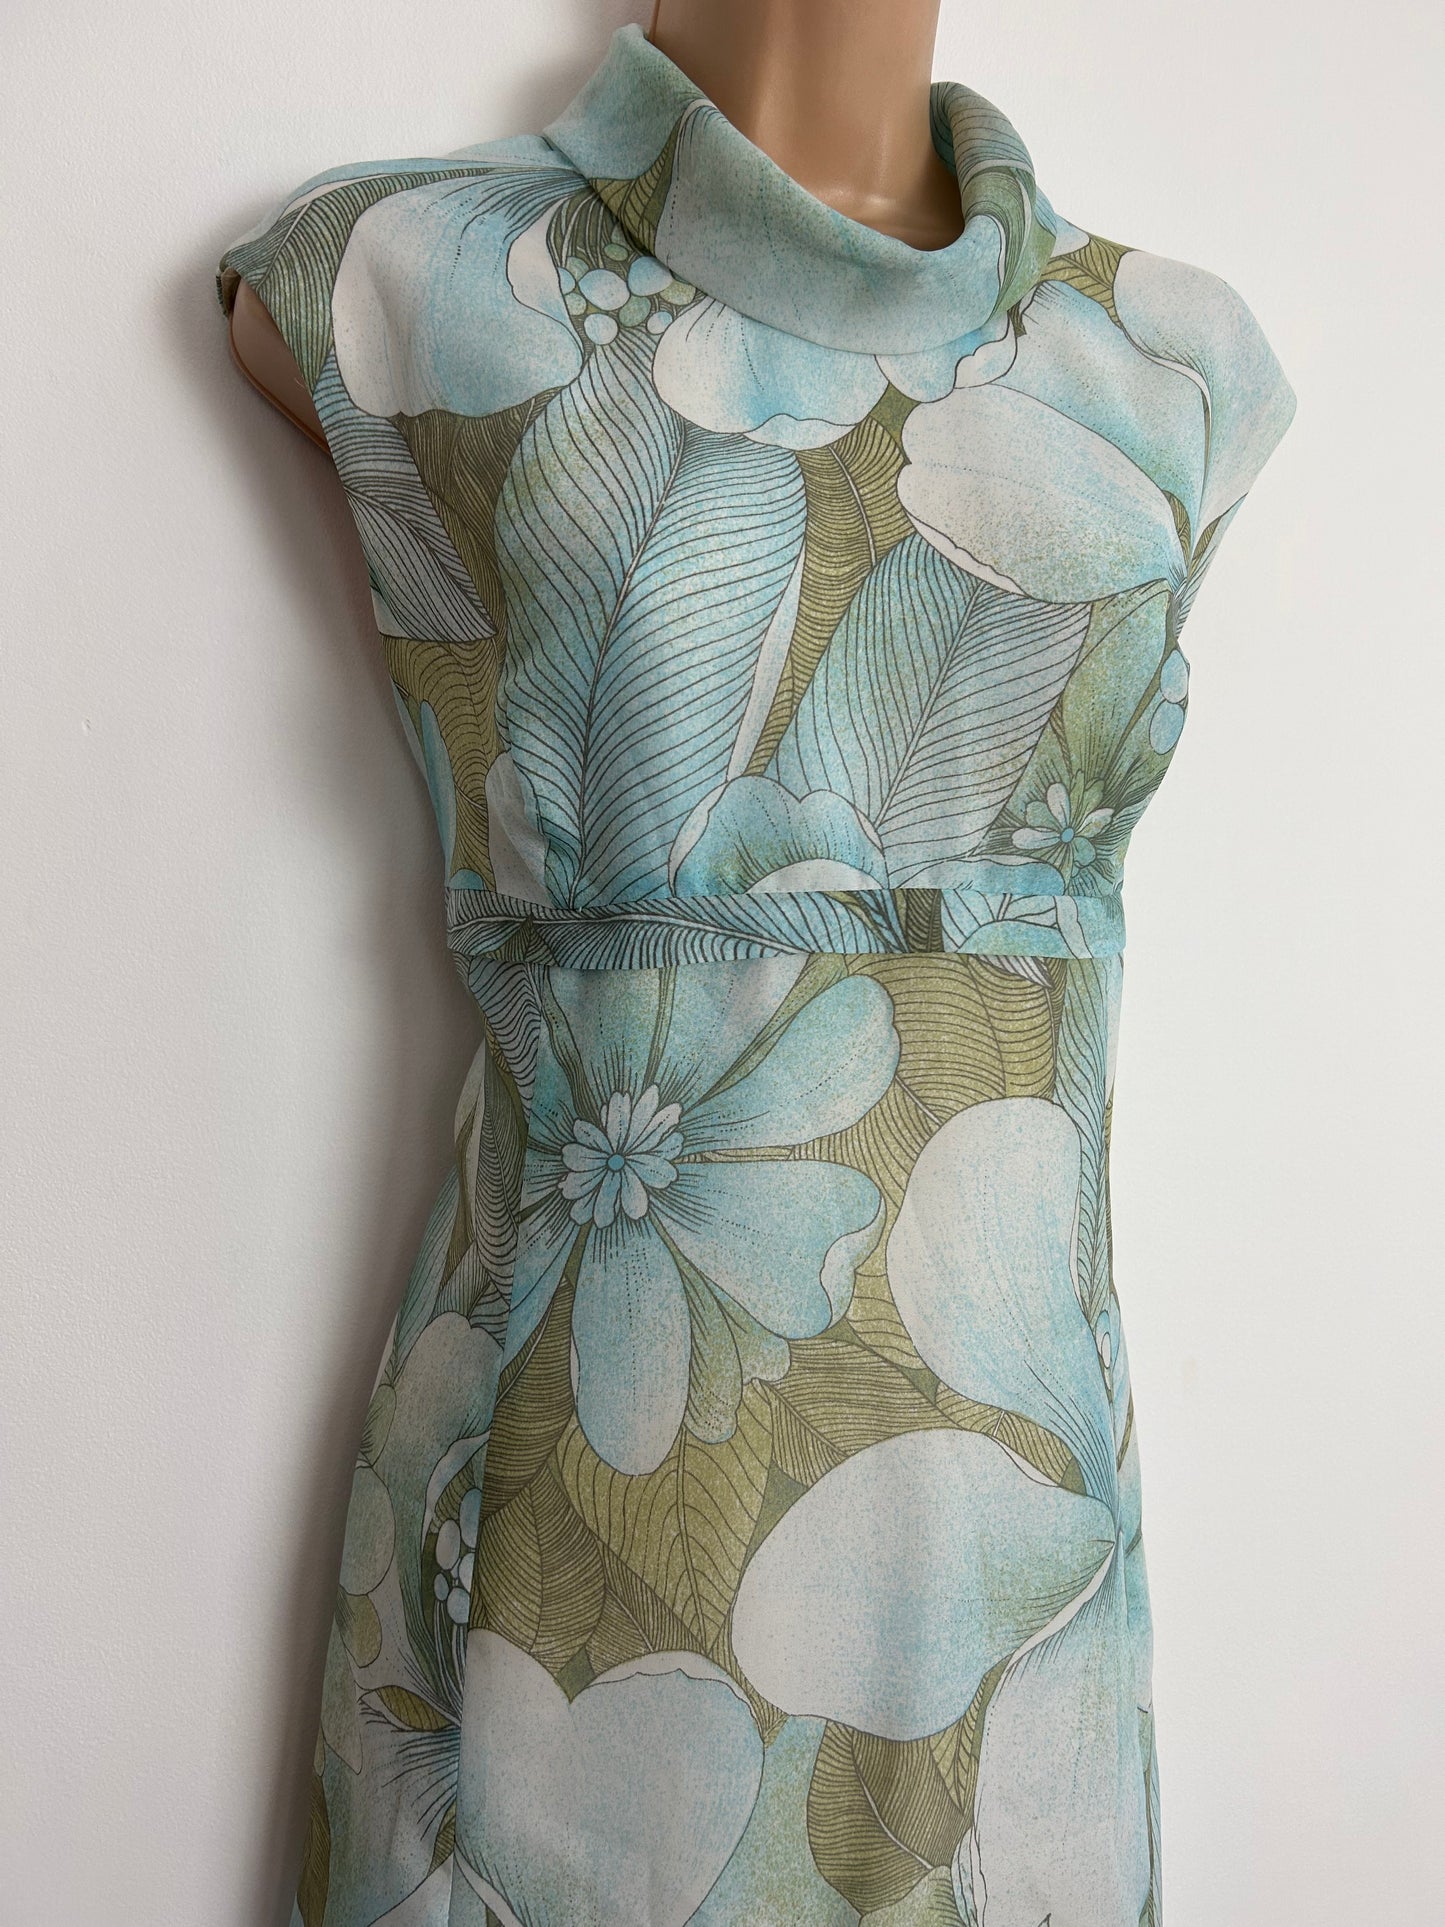 Vintage Early 1970s UK Size 14 Pretty Pale Blue & Green Floral Print Sleeveless Summer Occasion Dress